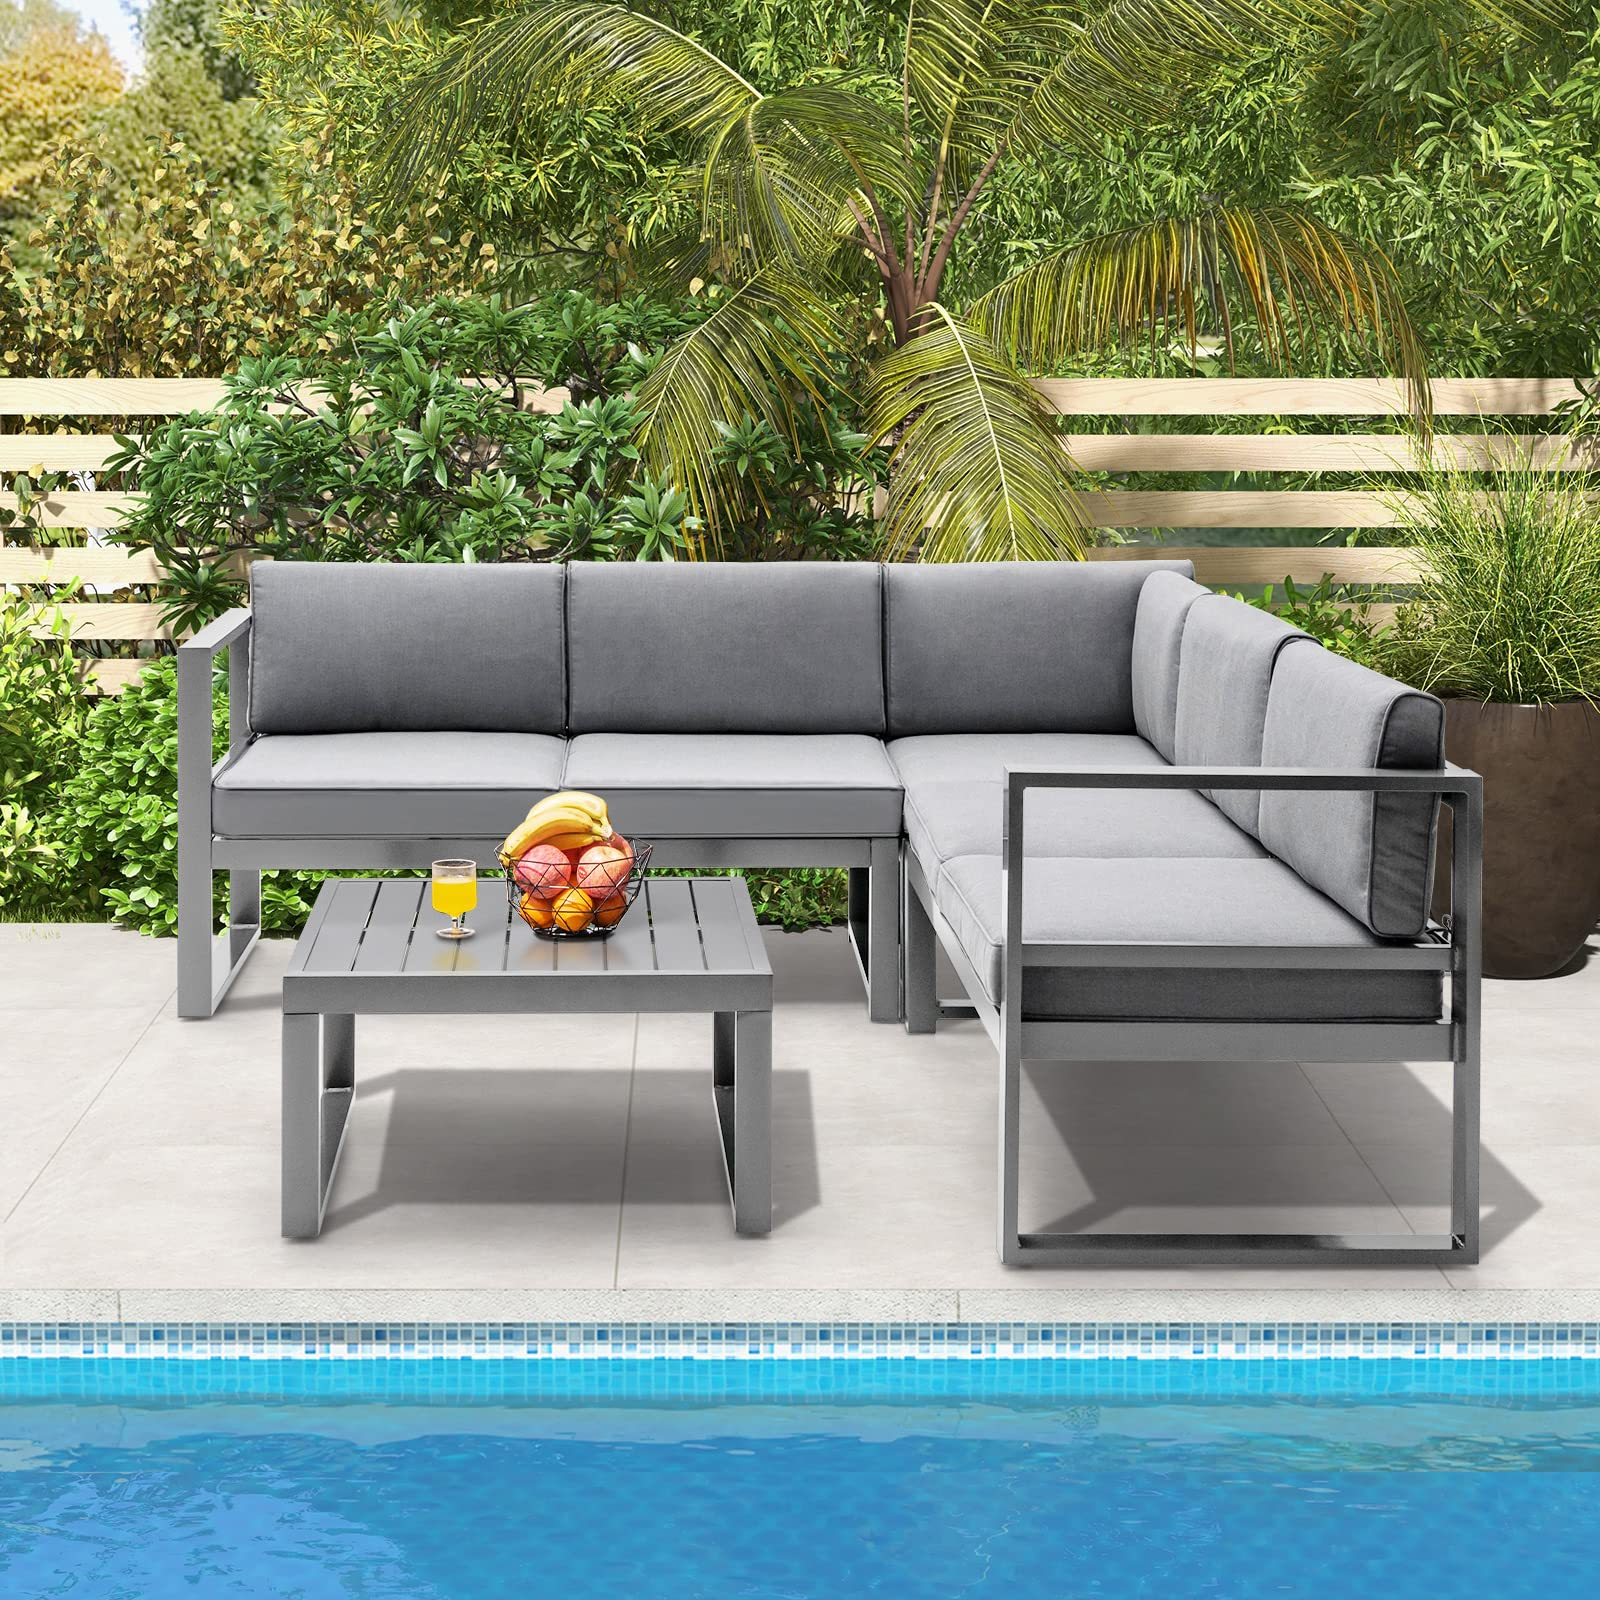 Why Modular Outdoor Furniture is the Best Choice: 5 Reasons